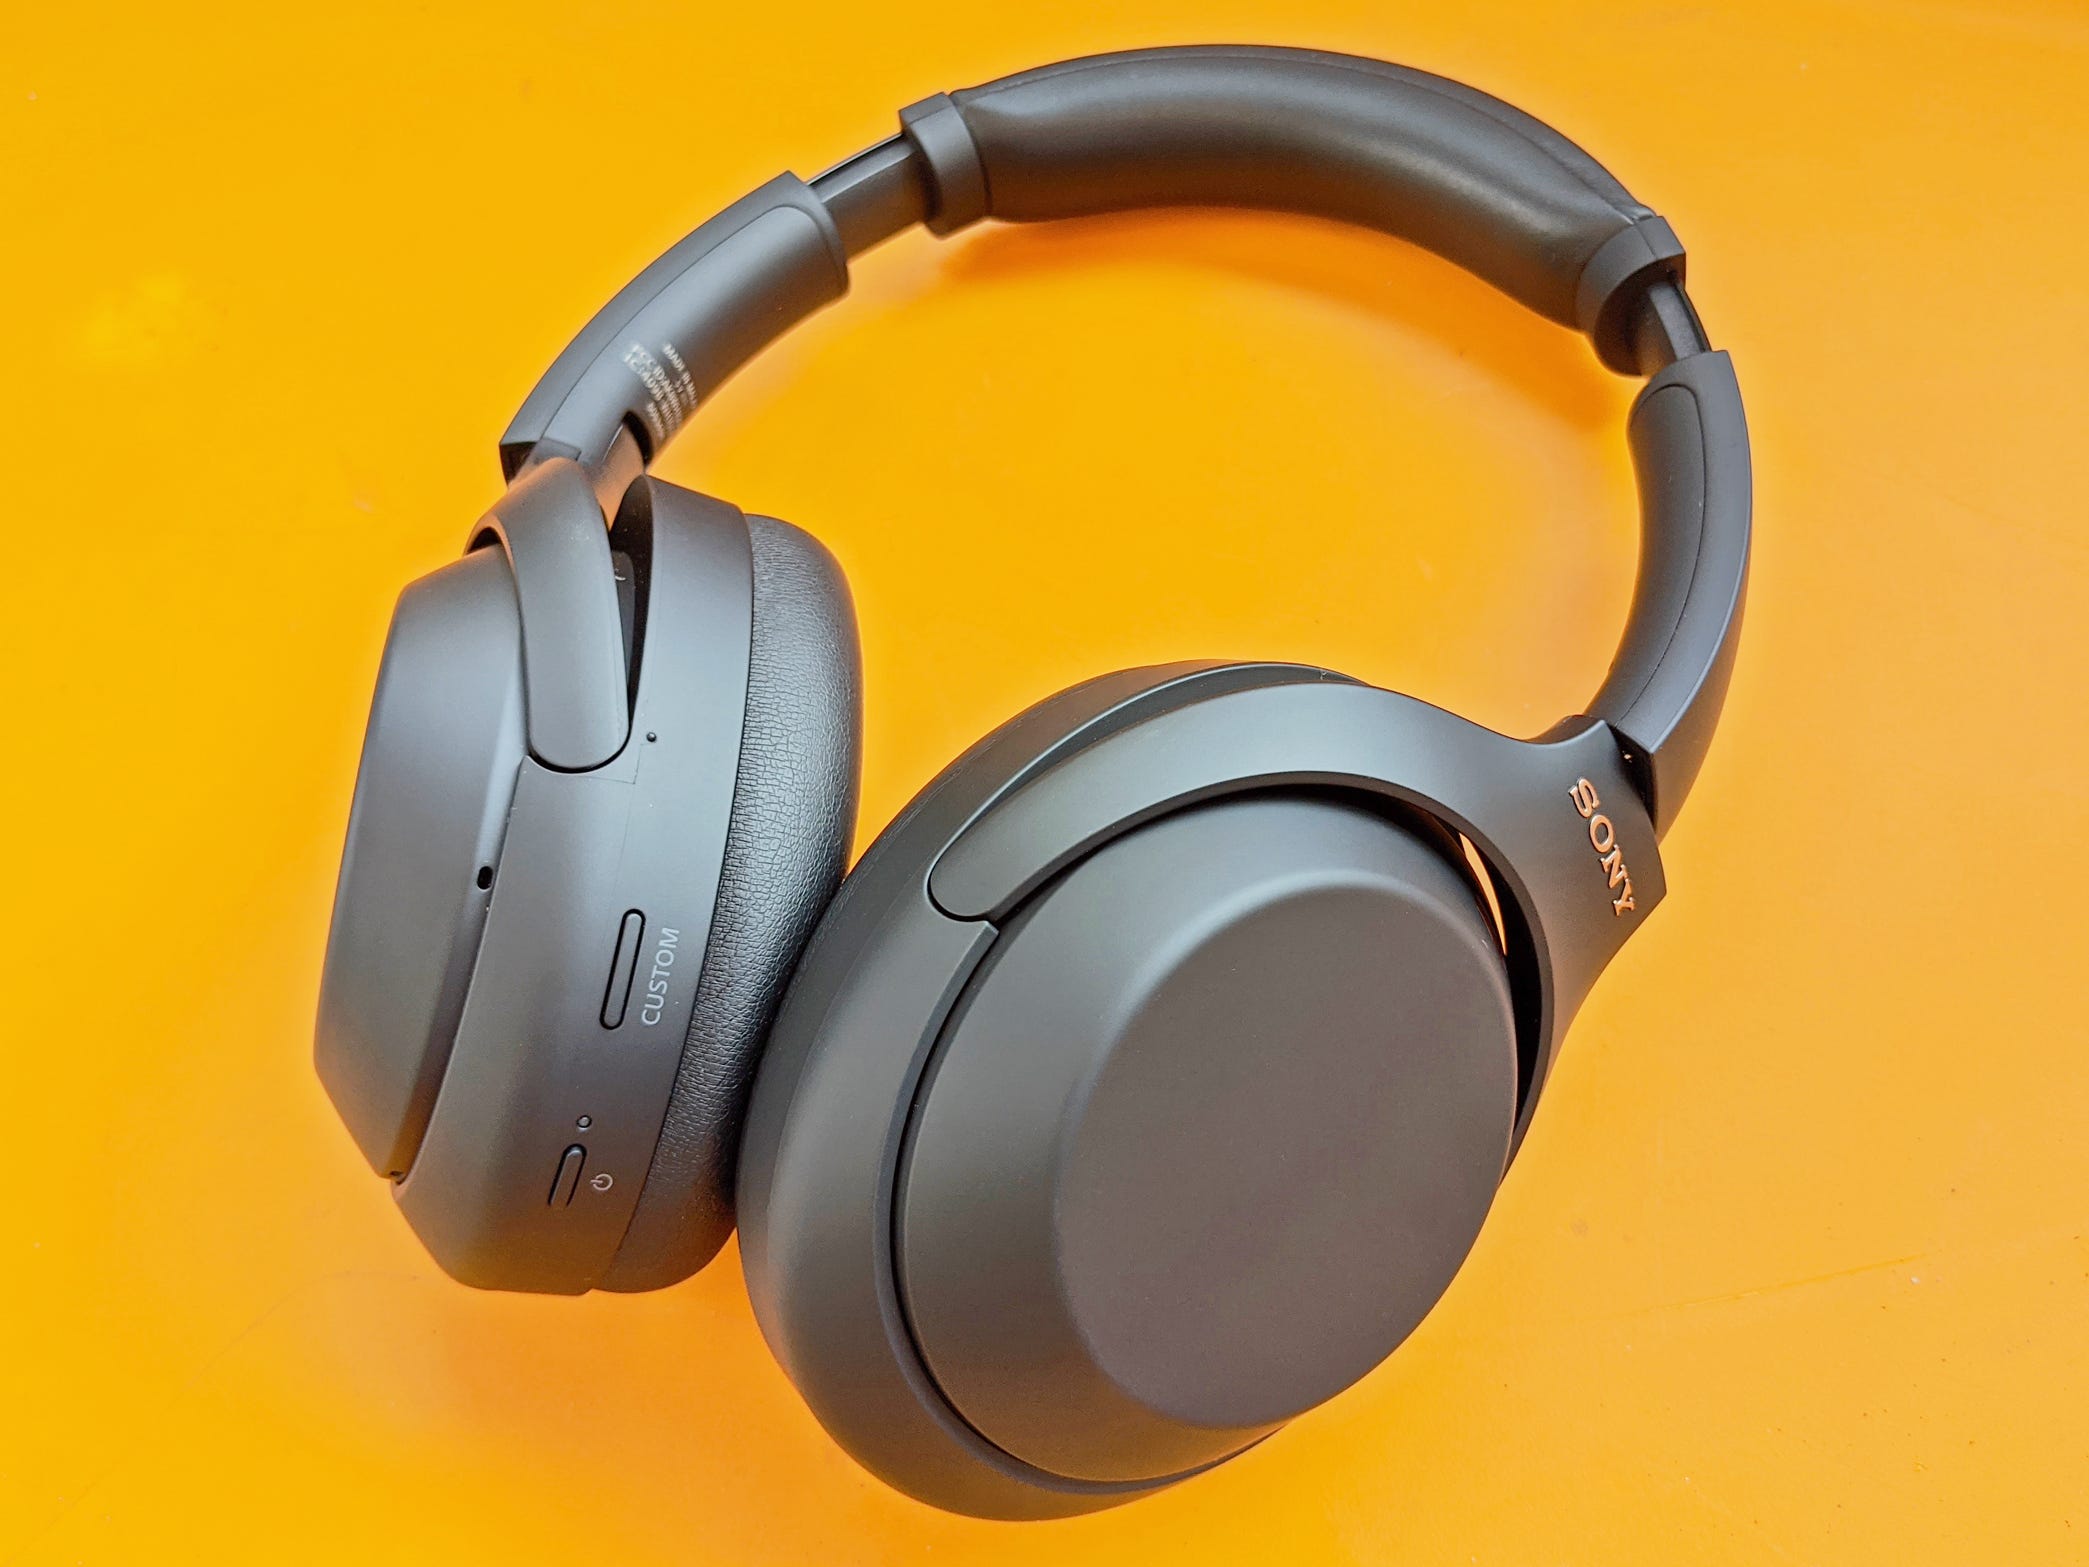 Seriously, why arenât you buying the best headphones in the world at this price? Sony WH-1000XM4 